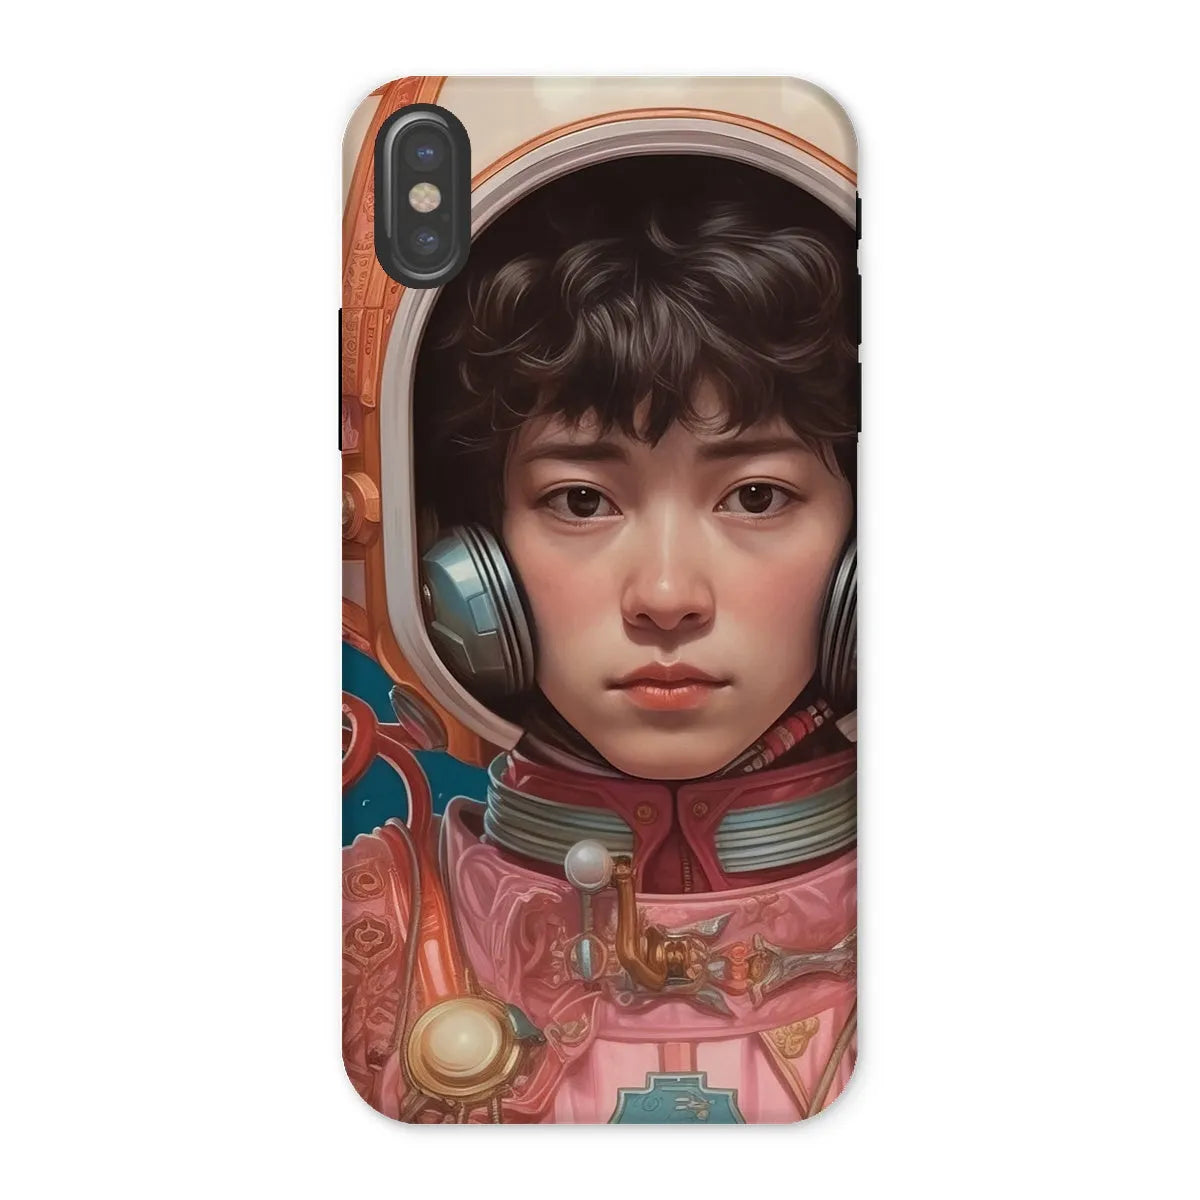 Kaito The Gay Astronaut - Lgbtq Art Phone Case - Iphone x / Matte - Mobile Phone Cases - Aesthetic Art